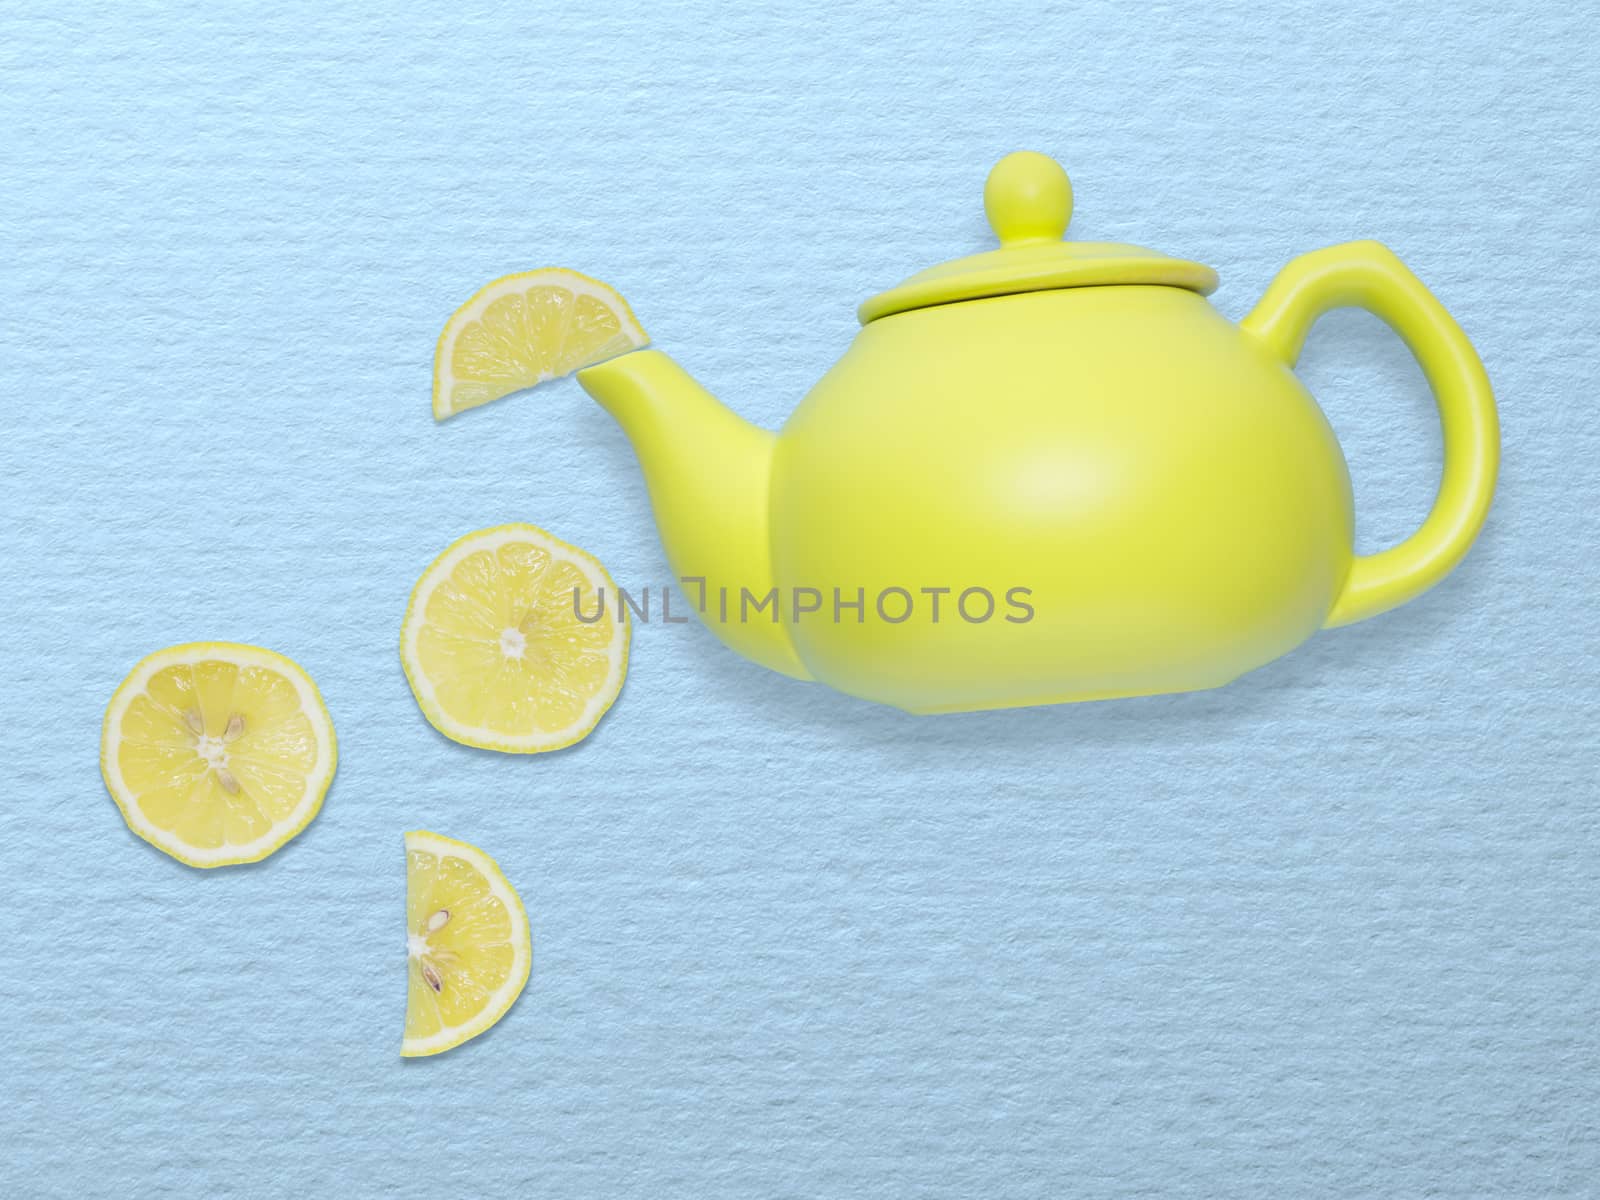 Creative concept photo of a tea pot with lemon slices on blue background.